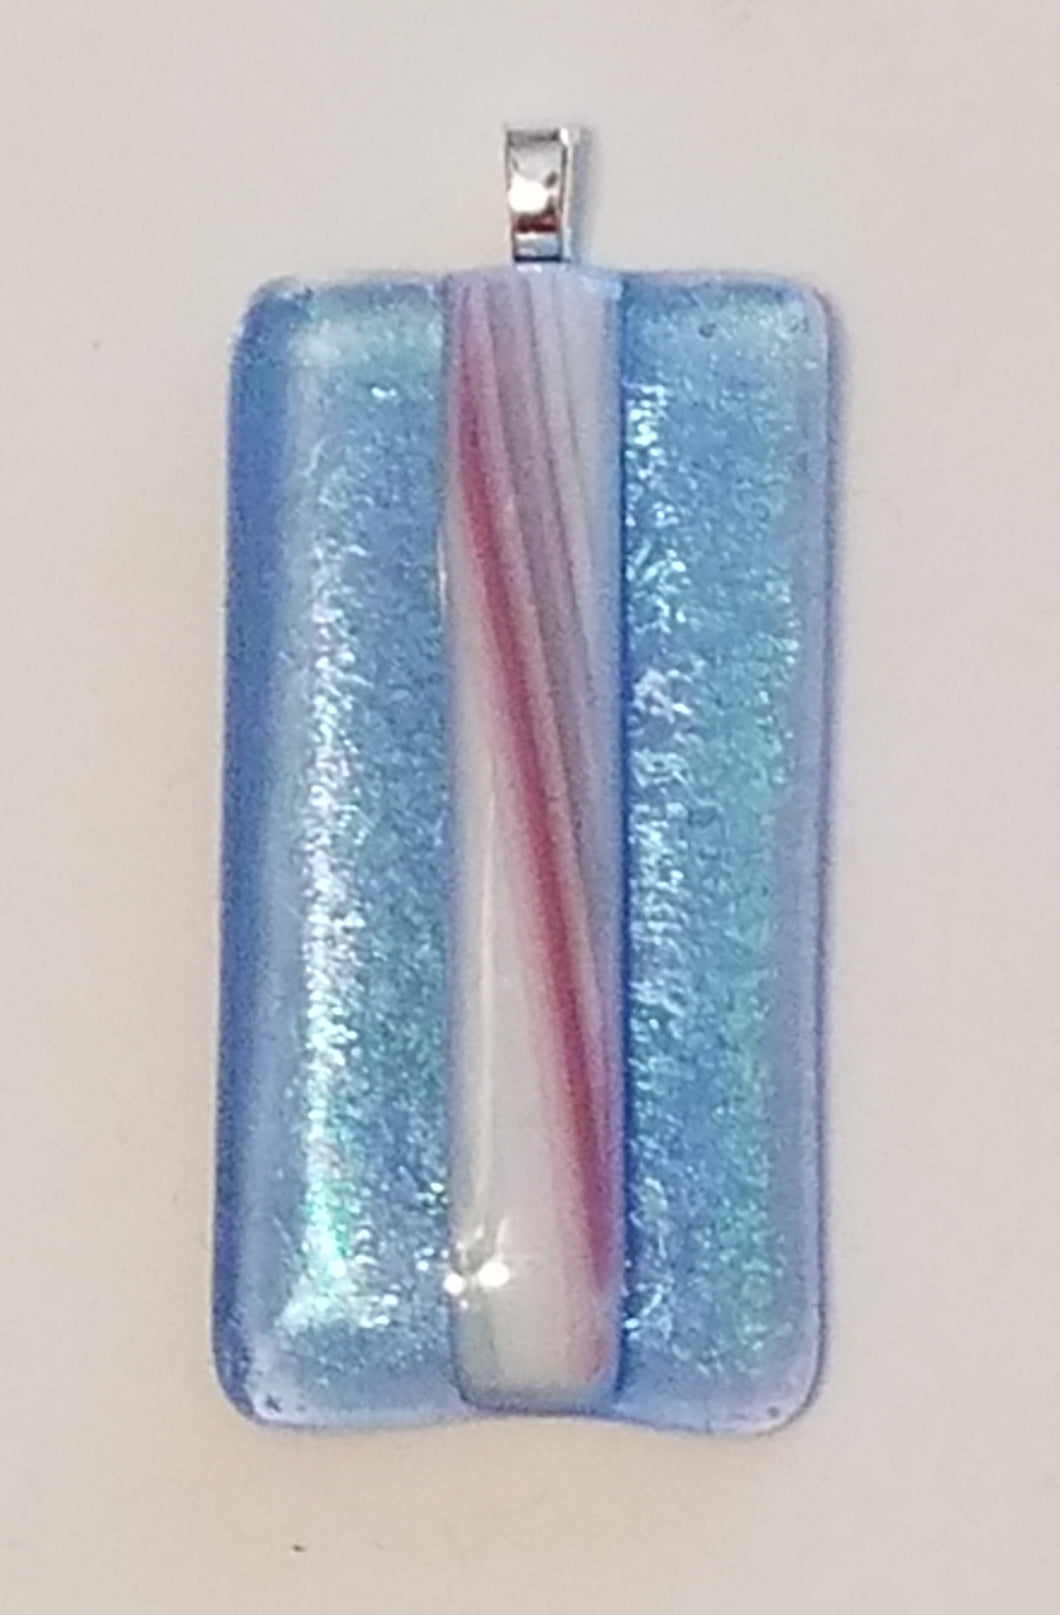 fused-glass-pendant-iridized-sky-blue-candy-cane-pink